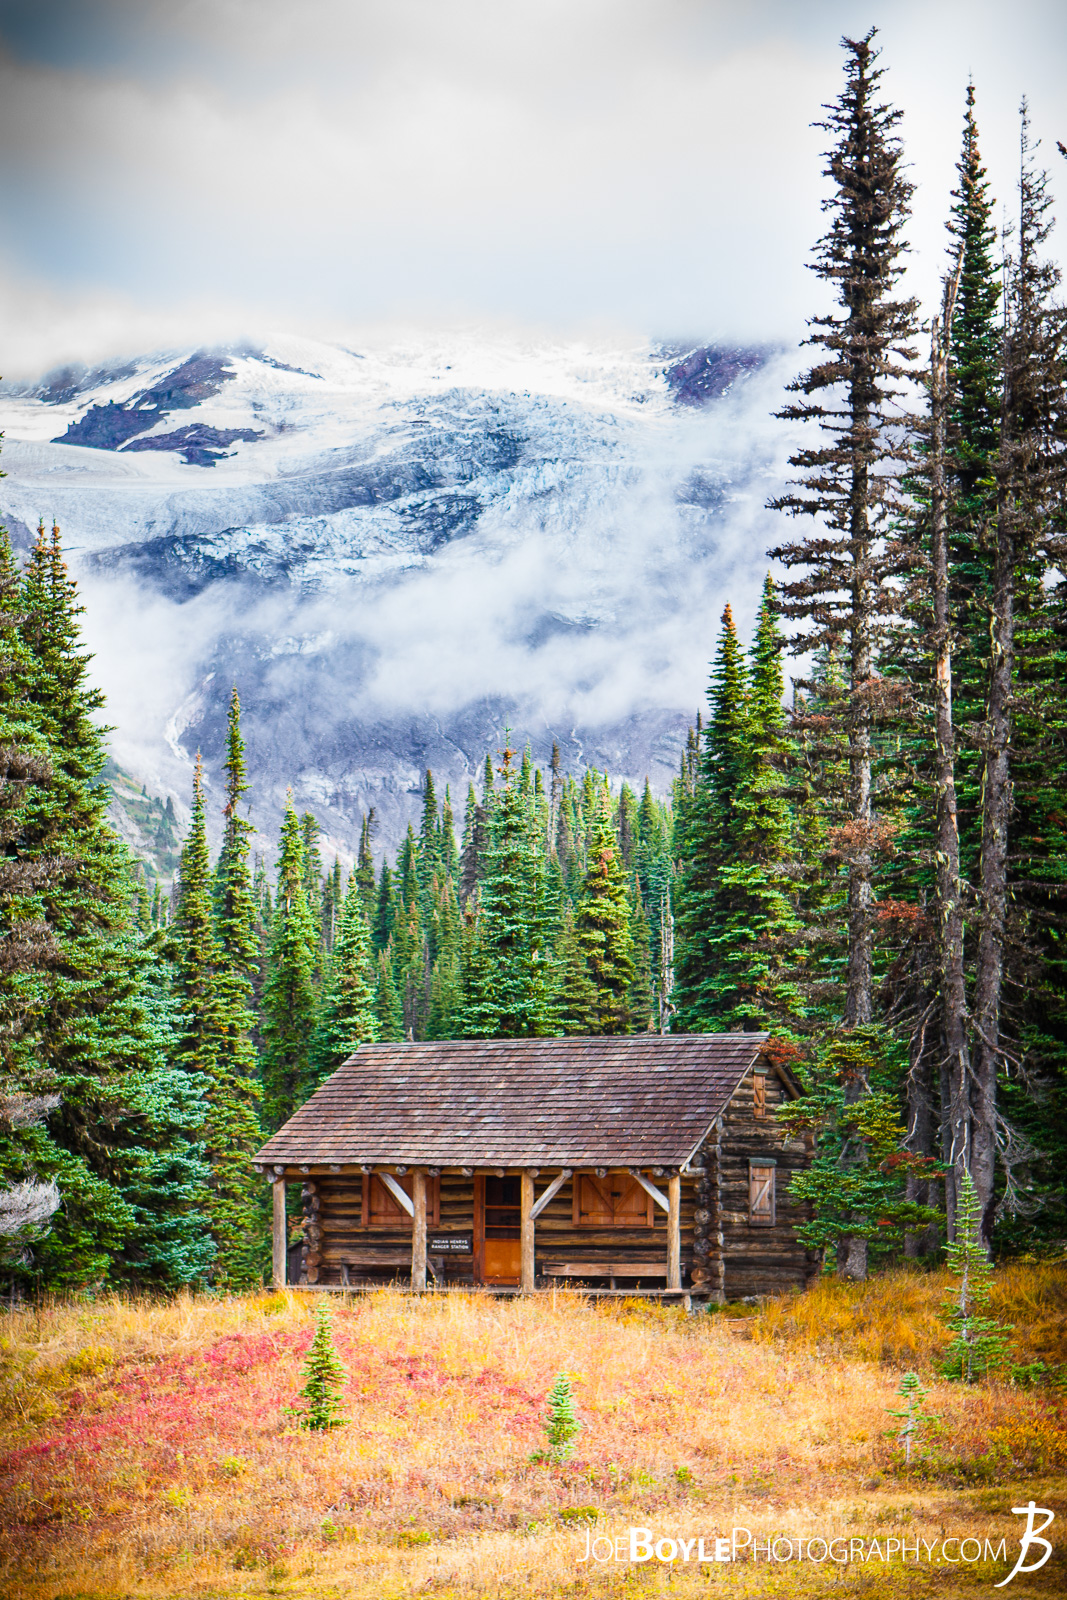  Indian Henry's Patrol Cabin with Mount Rainier as a beautiful backdrop! This was a short distance off of the main Wonderland Trail. 